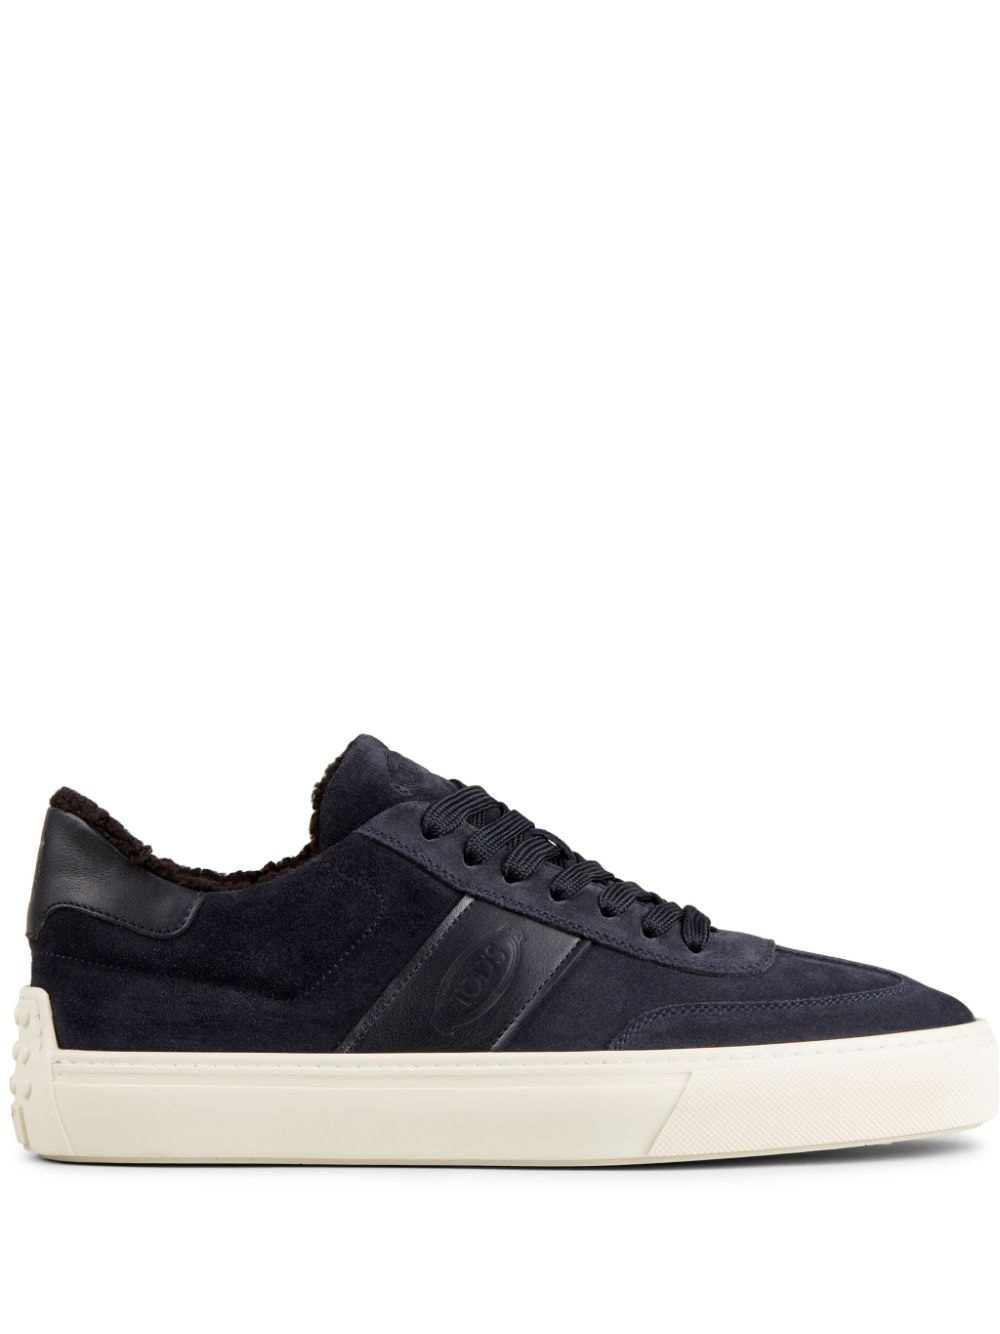 suede shearling-lined sneakers - 1